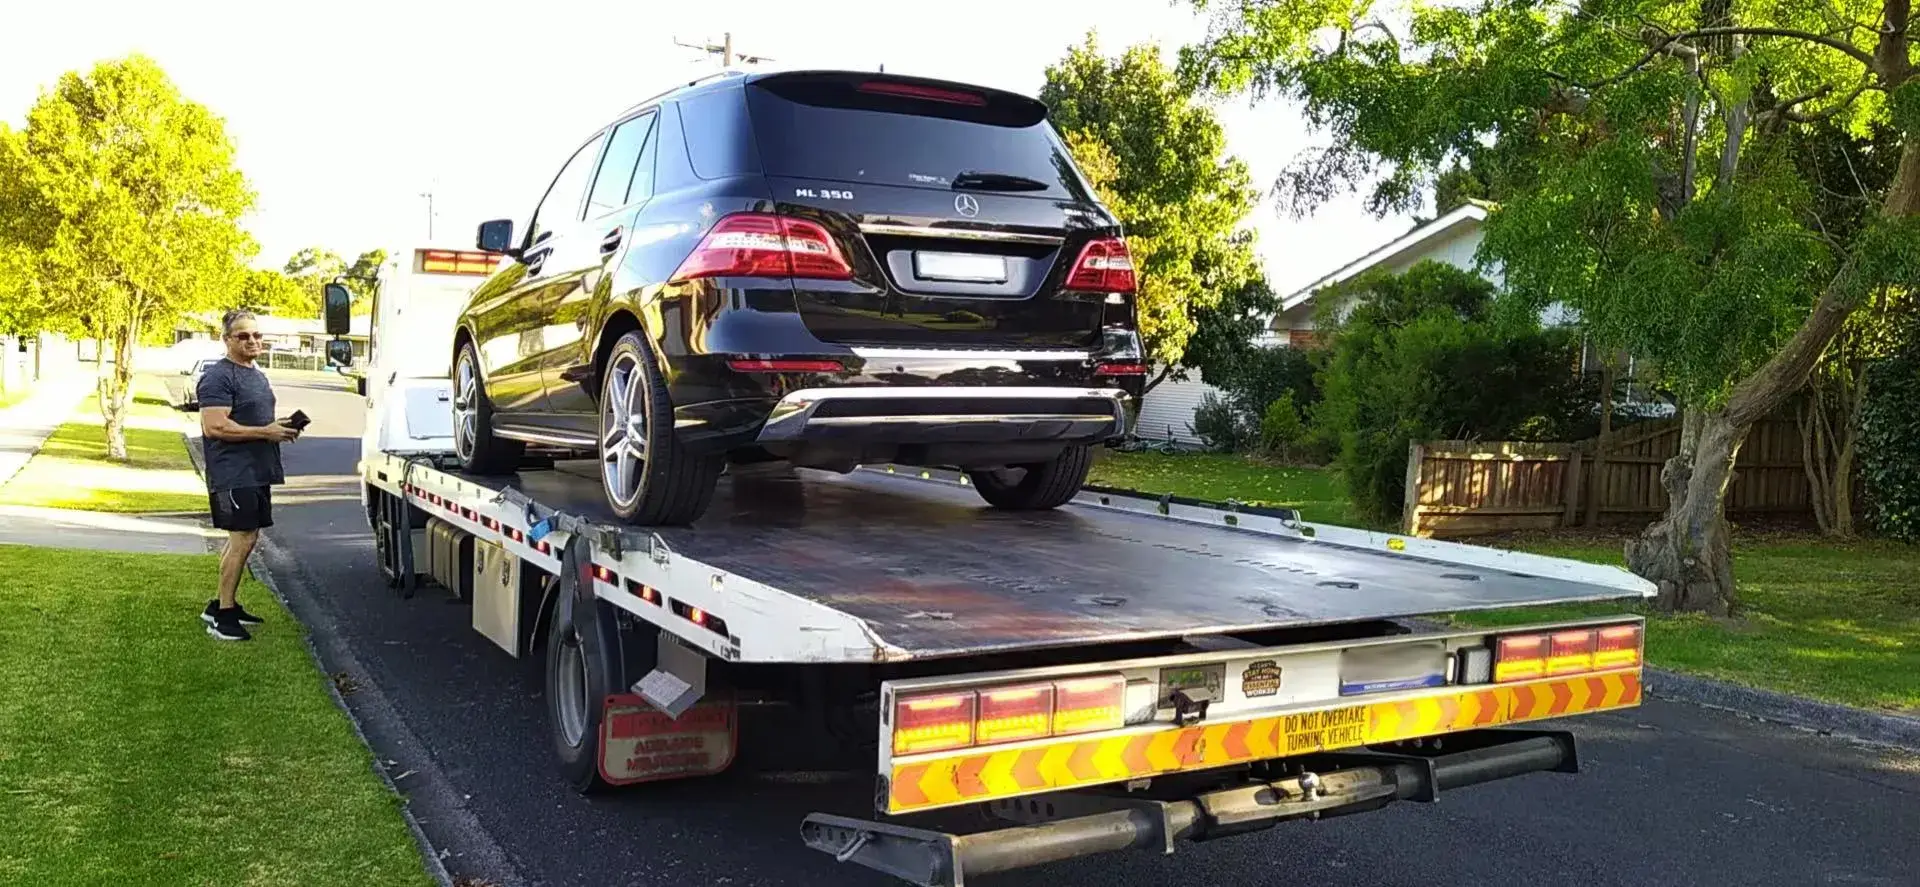 responsive and affortable car towing serive near you